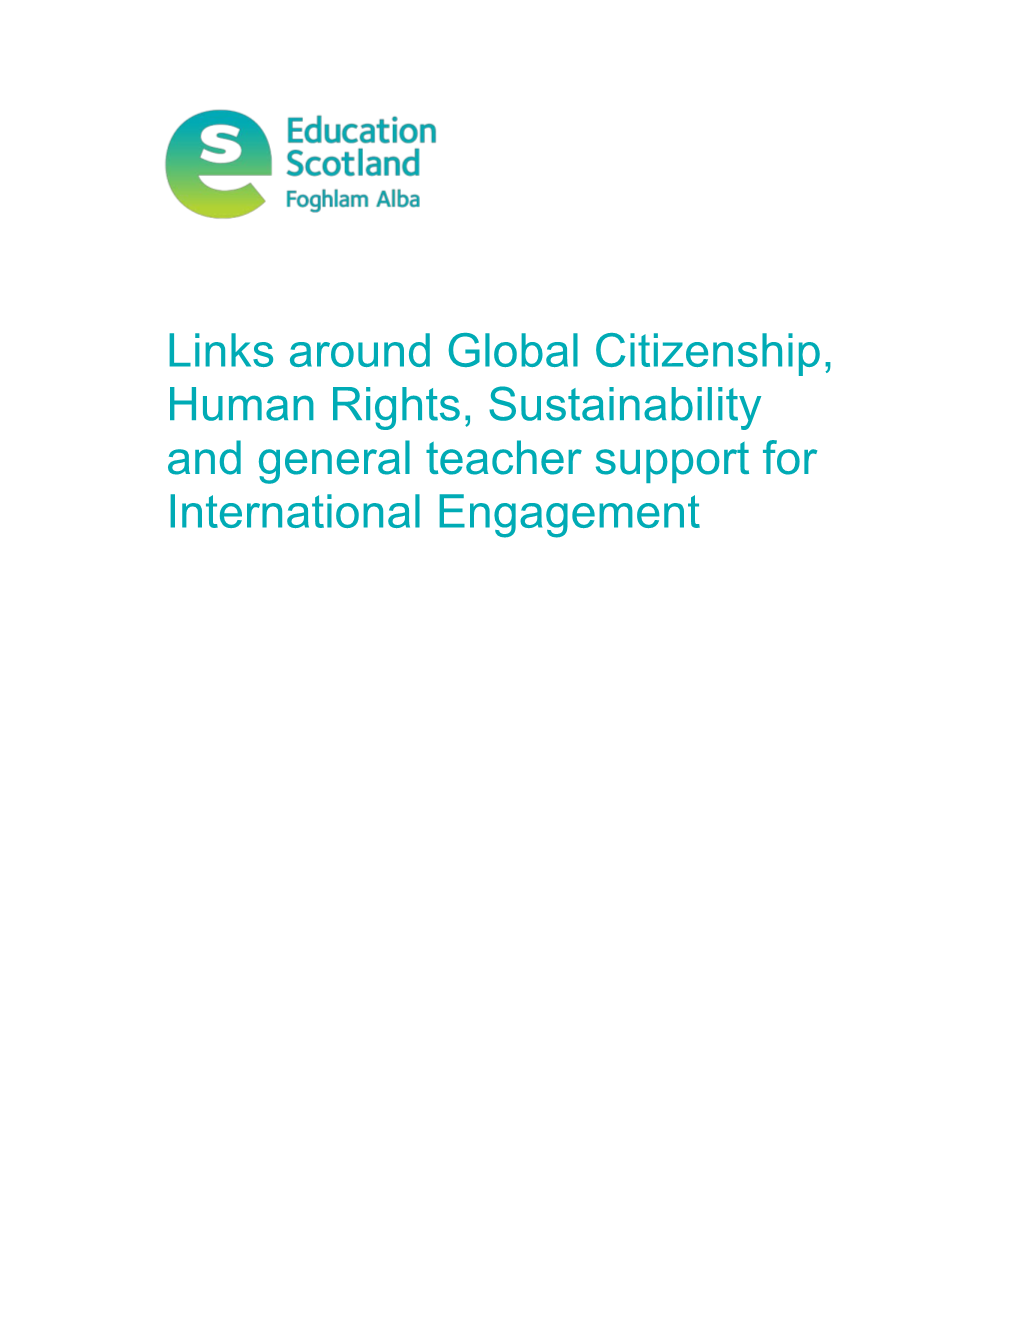 Word File: Links Around Global Citizenship, Human Rights, Sustainability and General Teacher